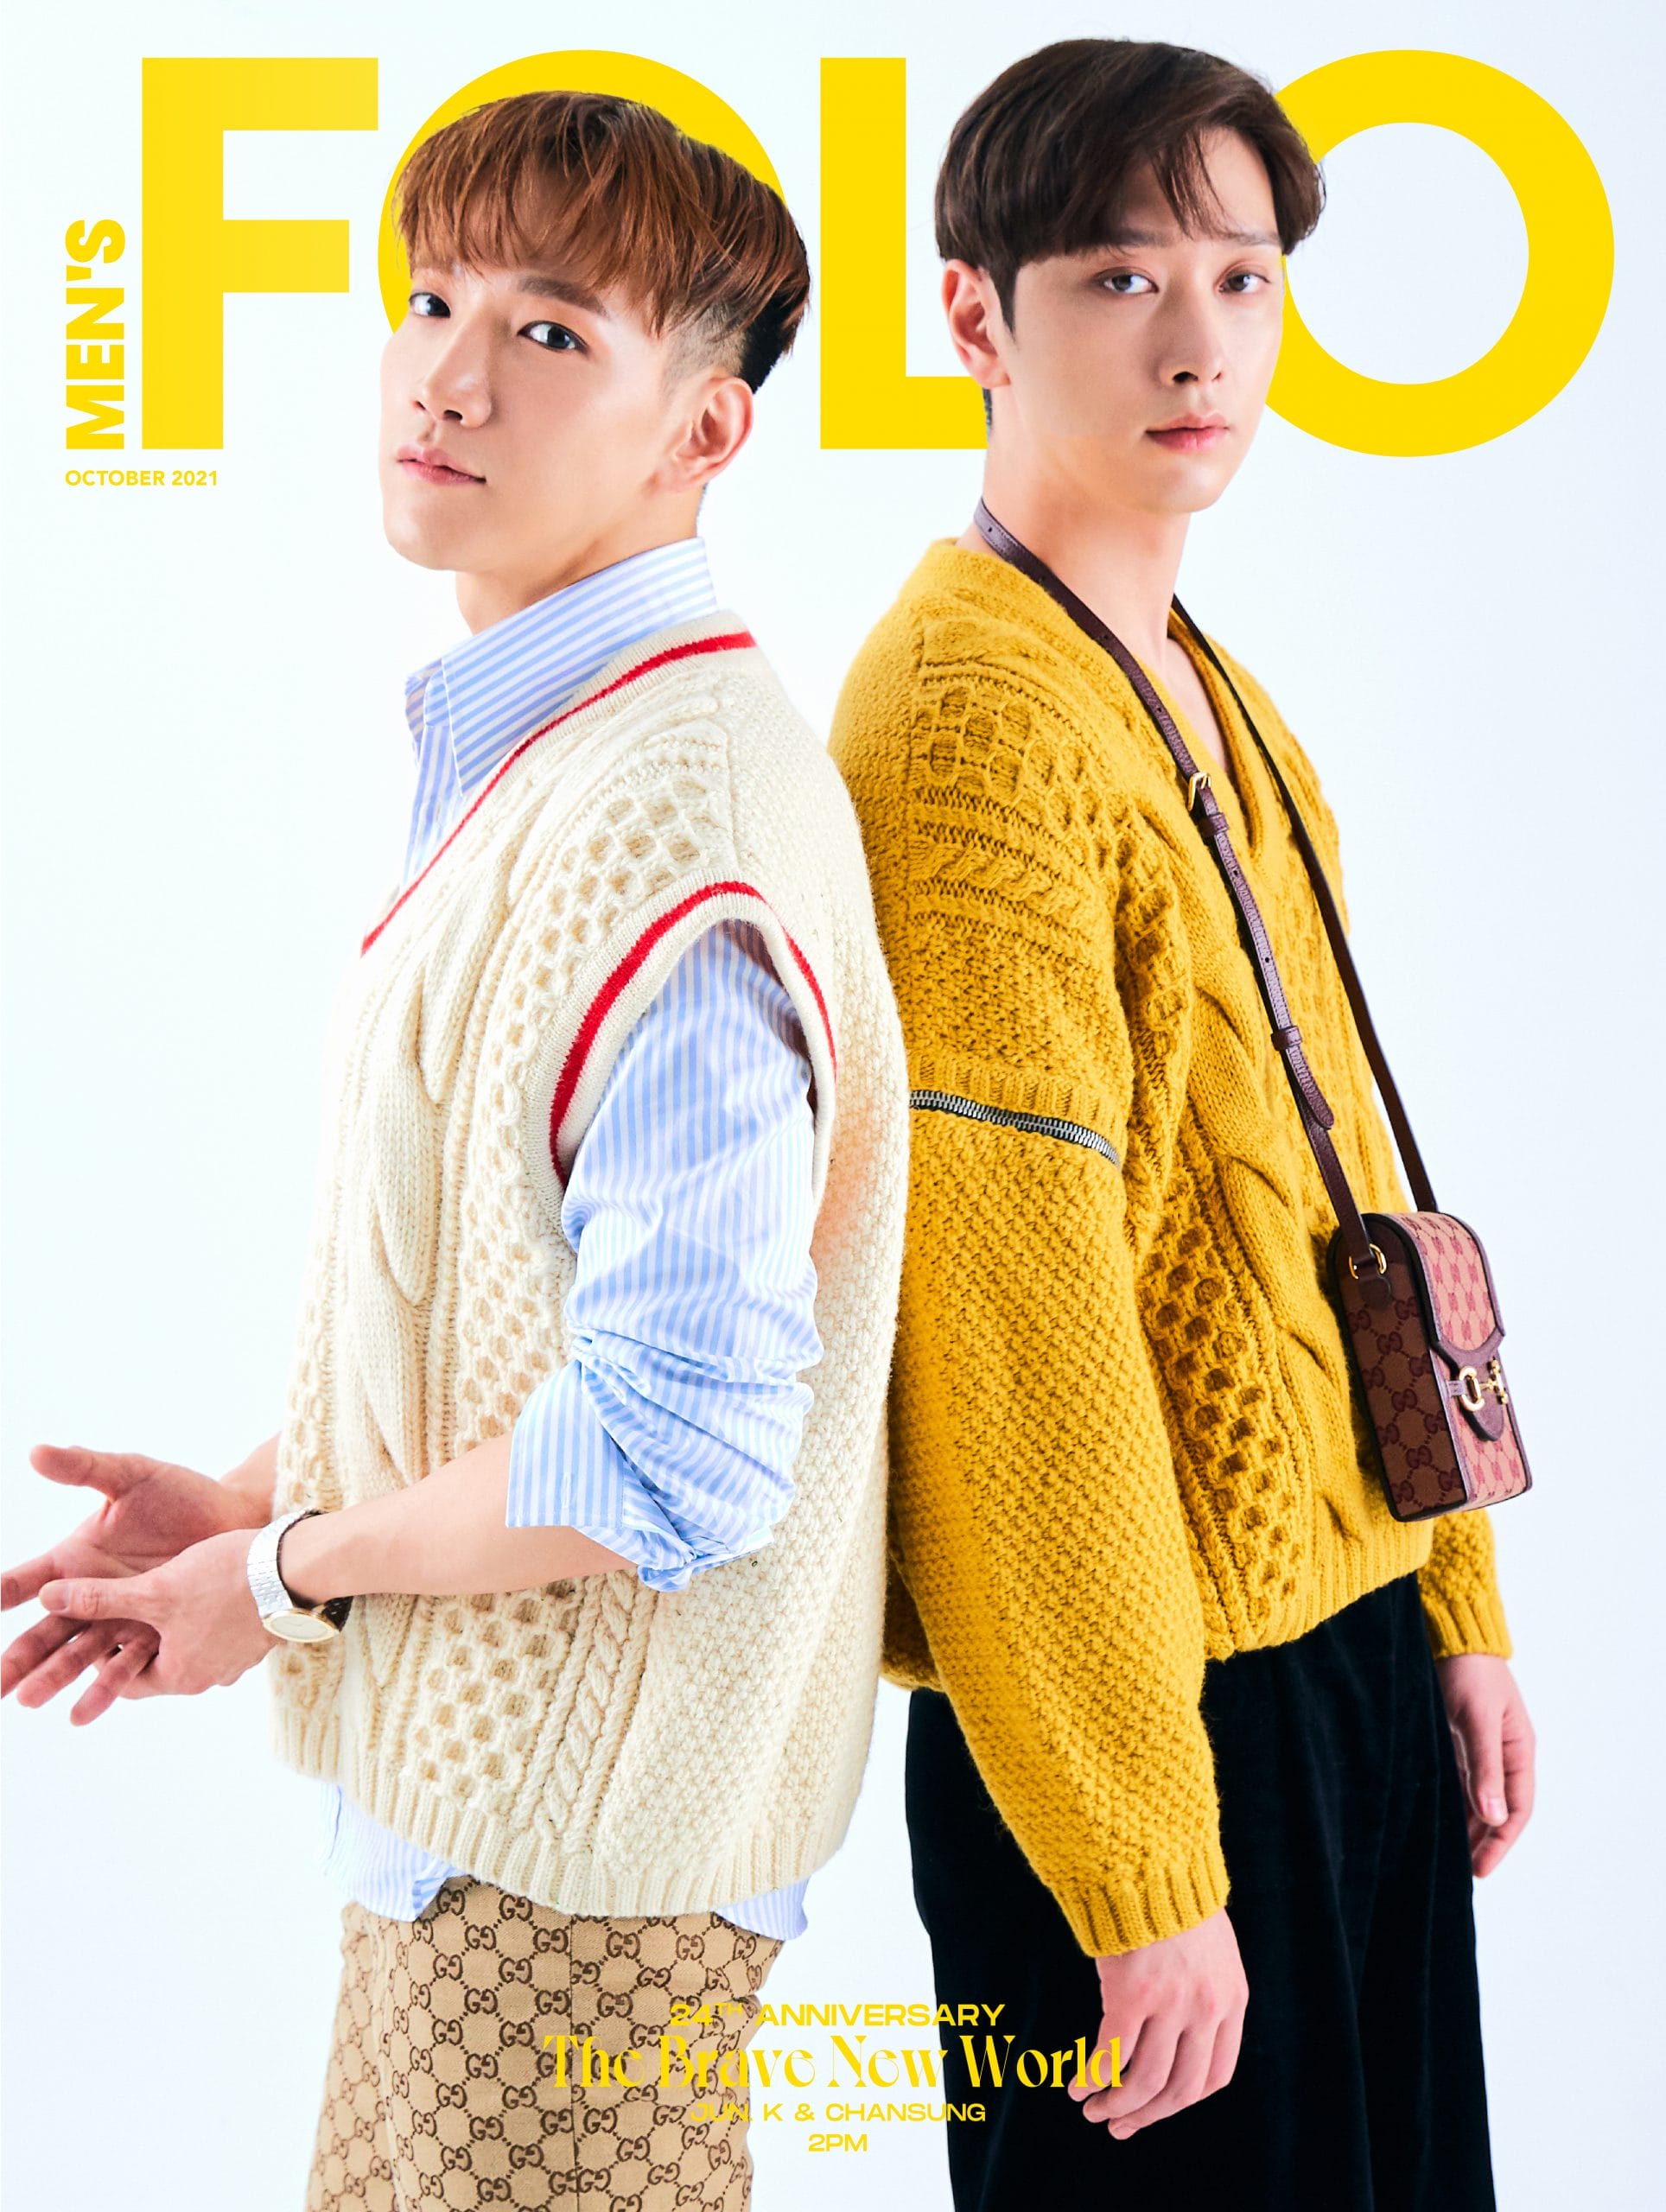 Our October 2021 Cover Stars JUN. K and CHANSUNG of 2PM On Their 